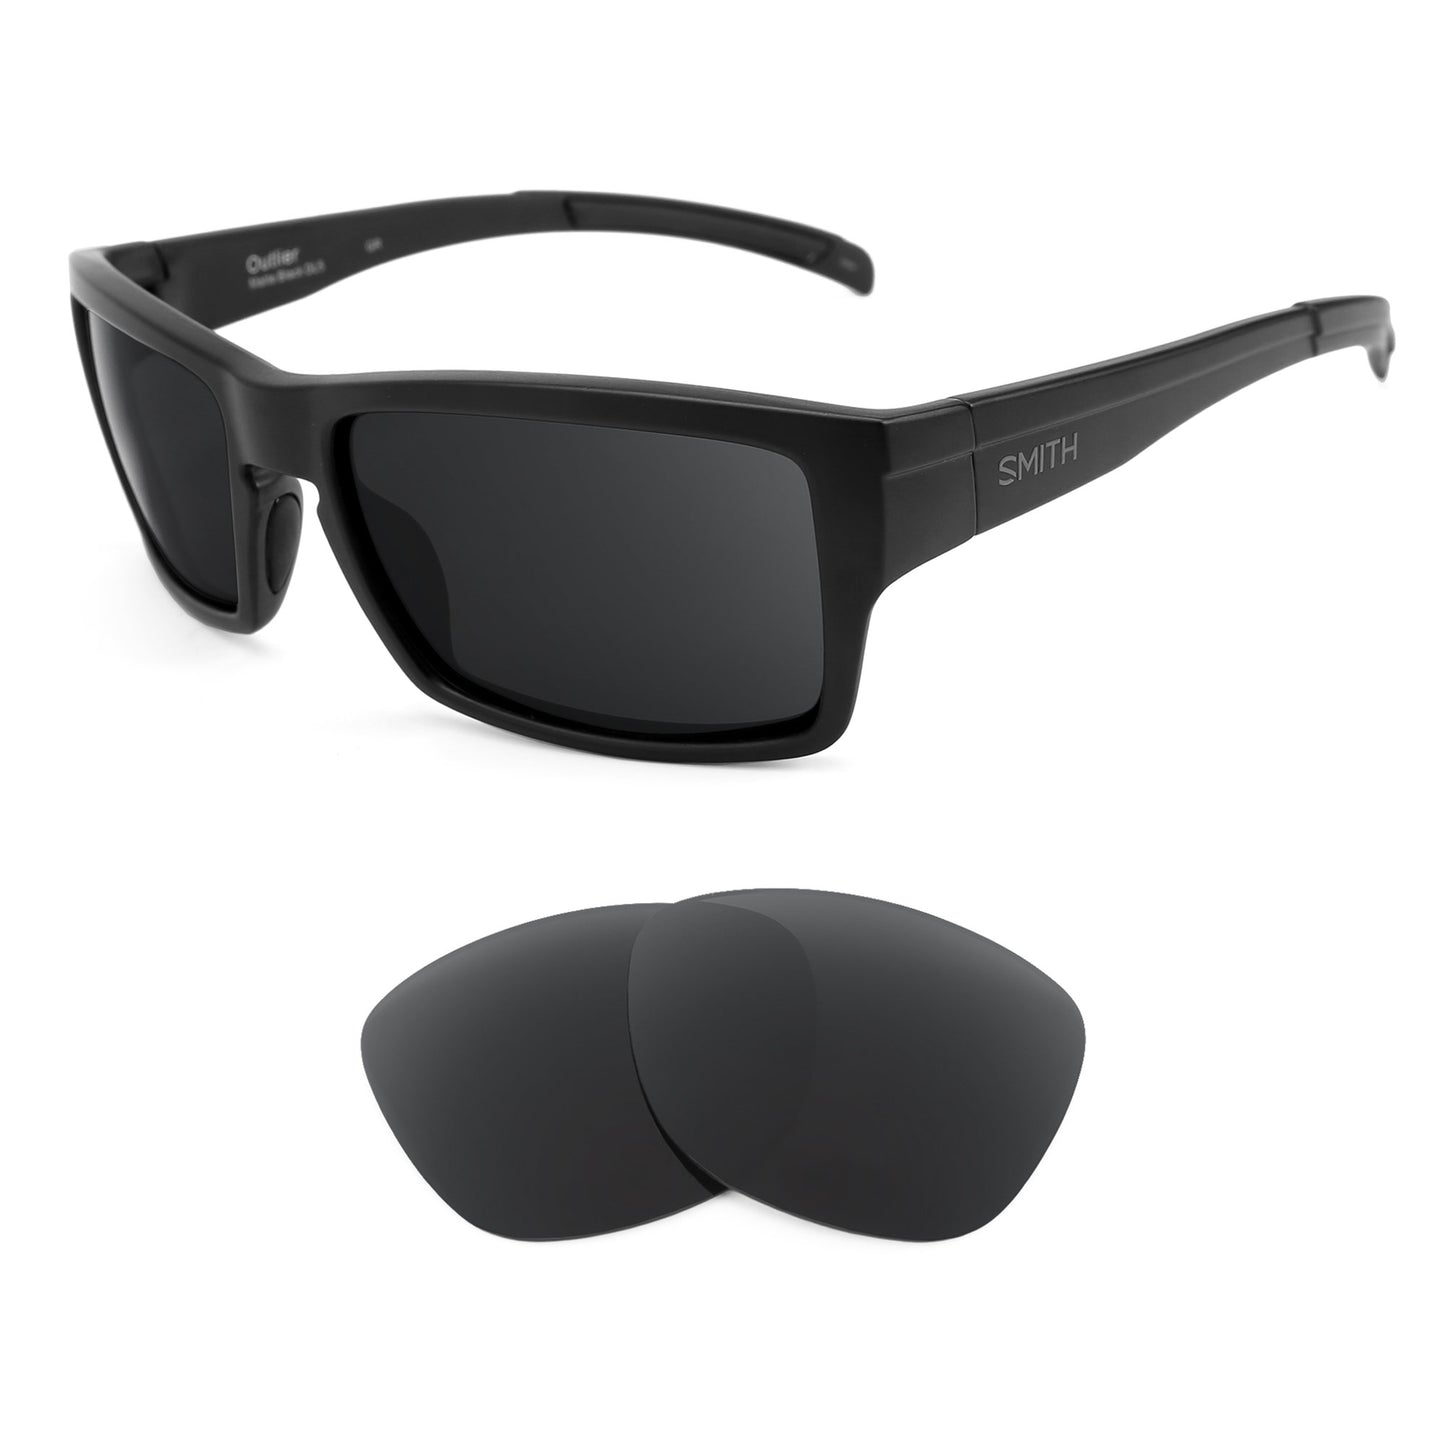 Smith Outlier sunglasses with replacement lenses